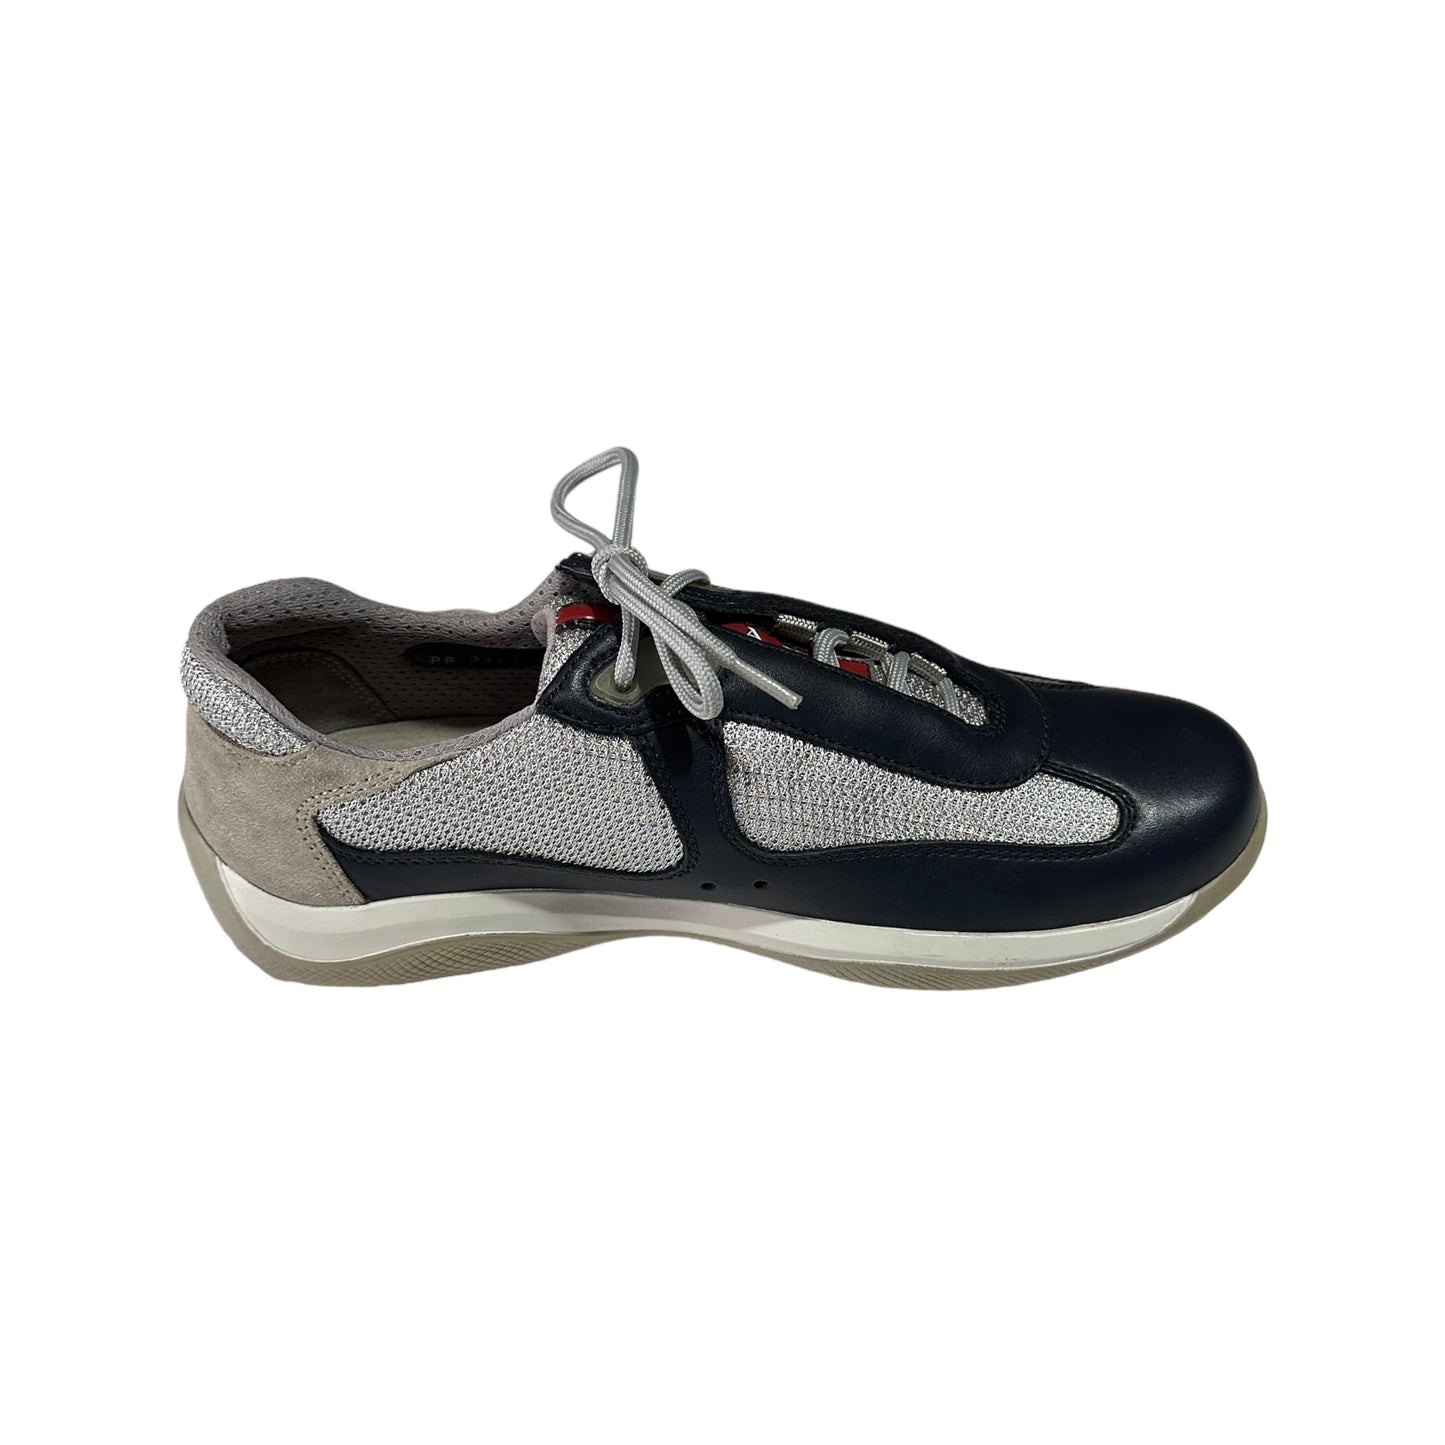 2000's America’s Cup Navy Shoes (38EU)